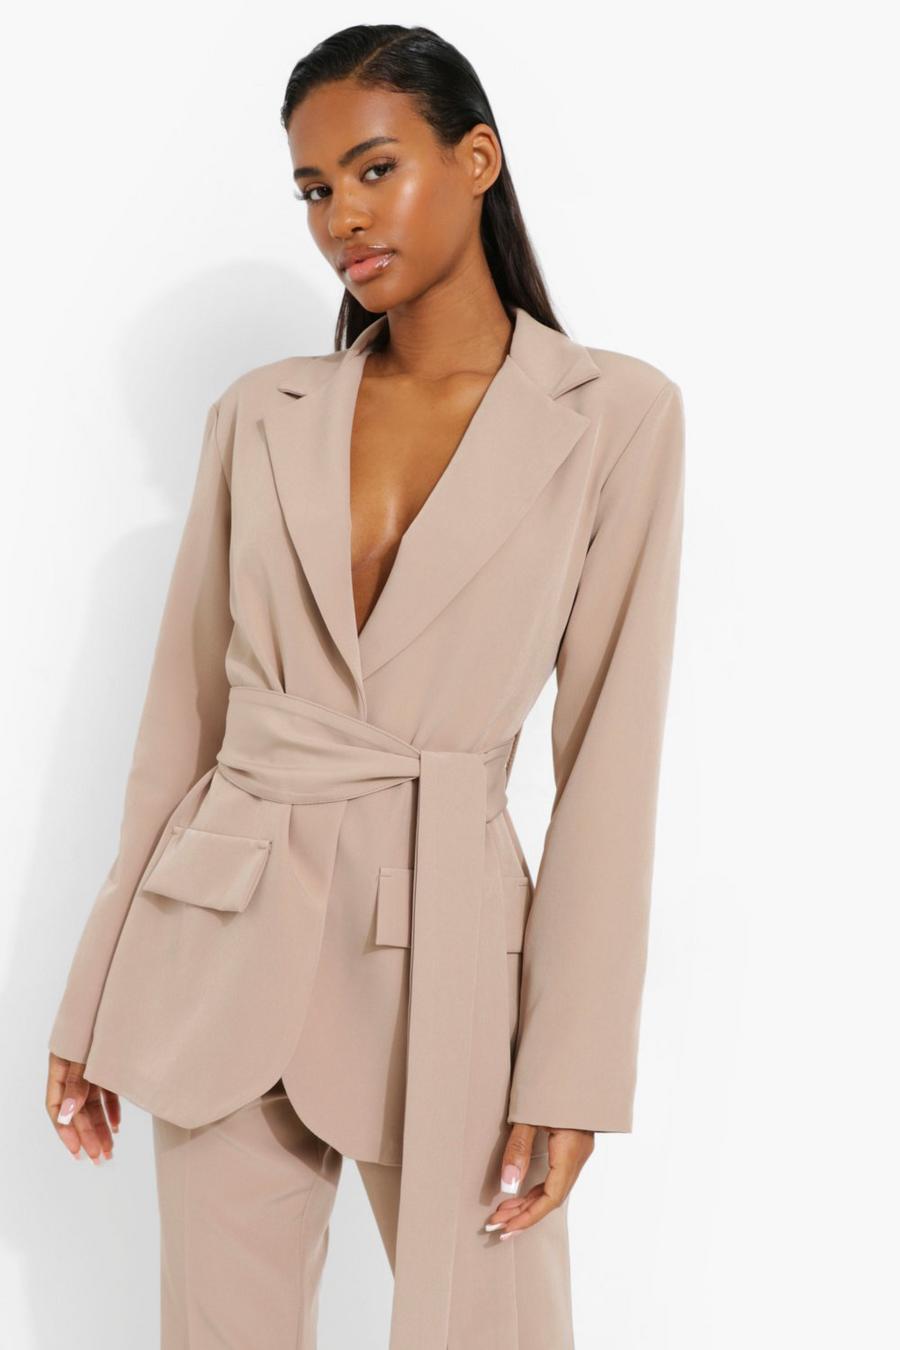 Wedding Guest Suits, Trouser Suits For Female Wedding Guests